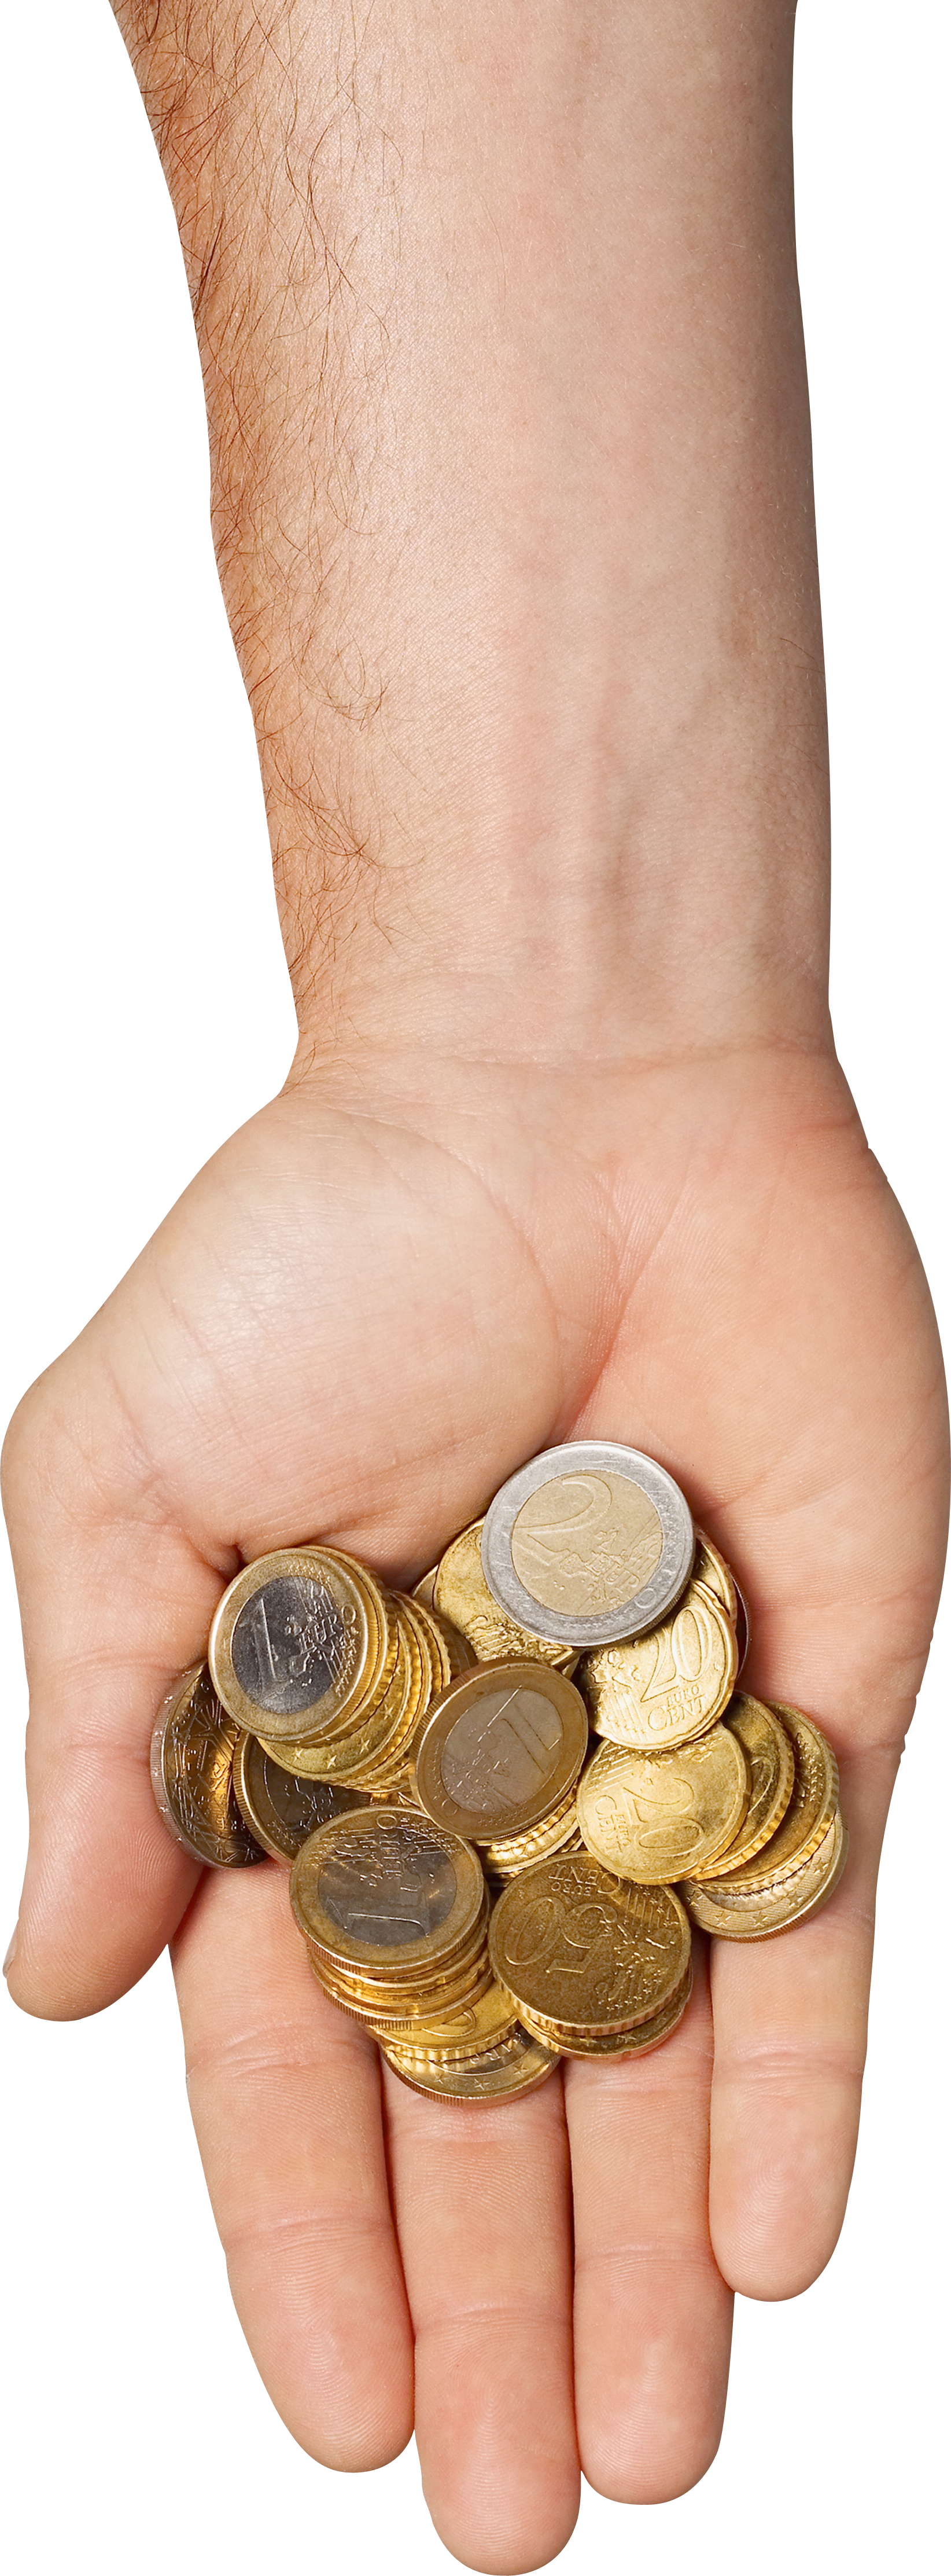 Coins in hand PNG image